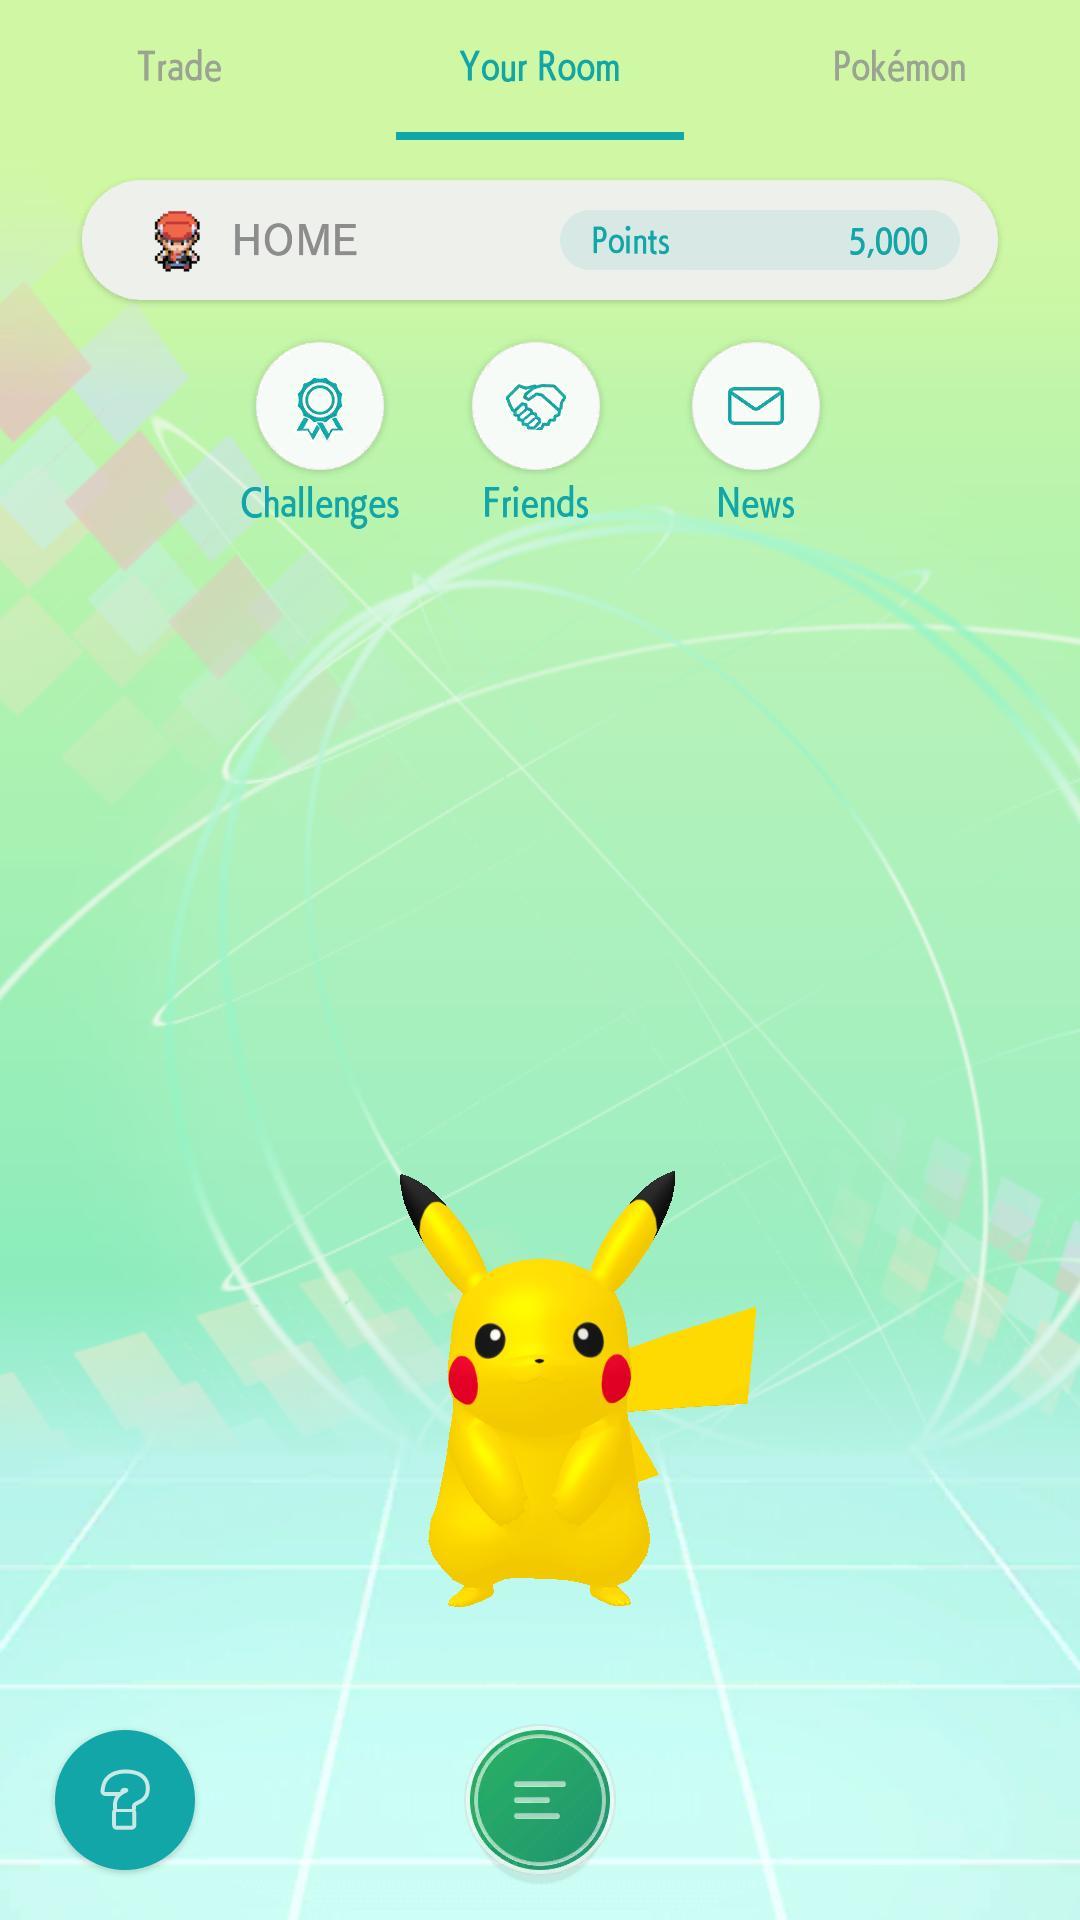 Free download Pokémon GO APK for Android